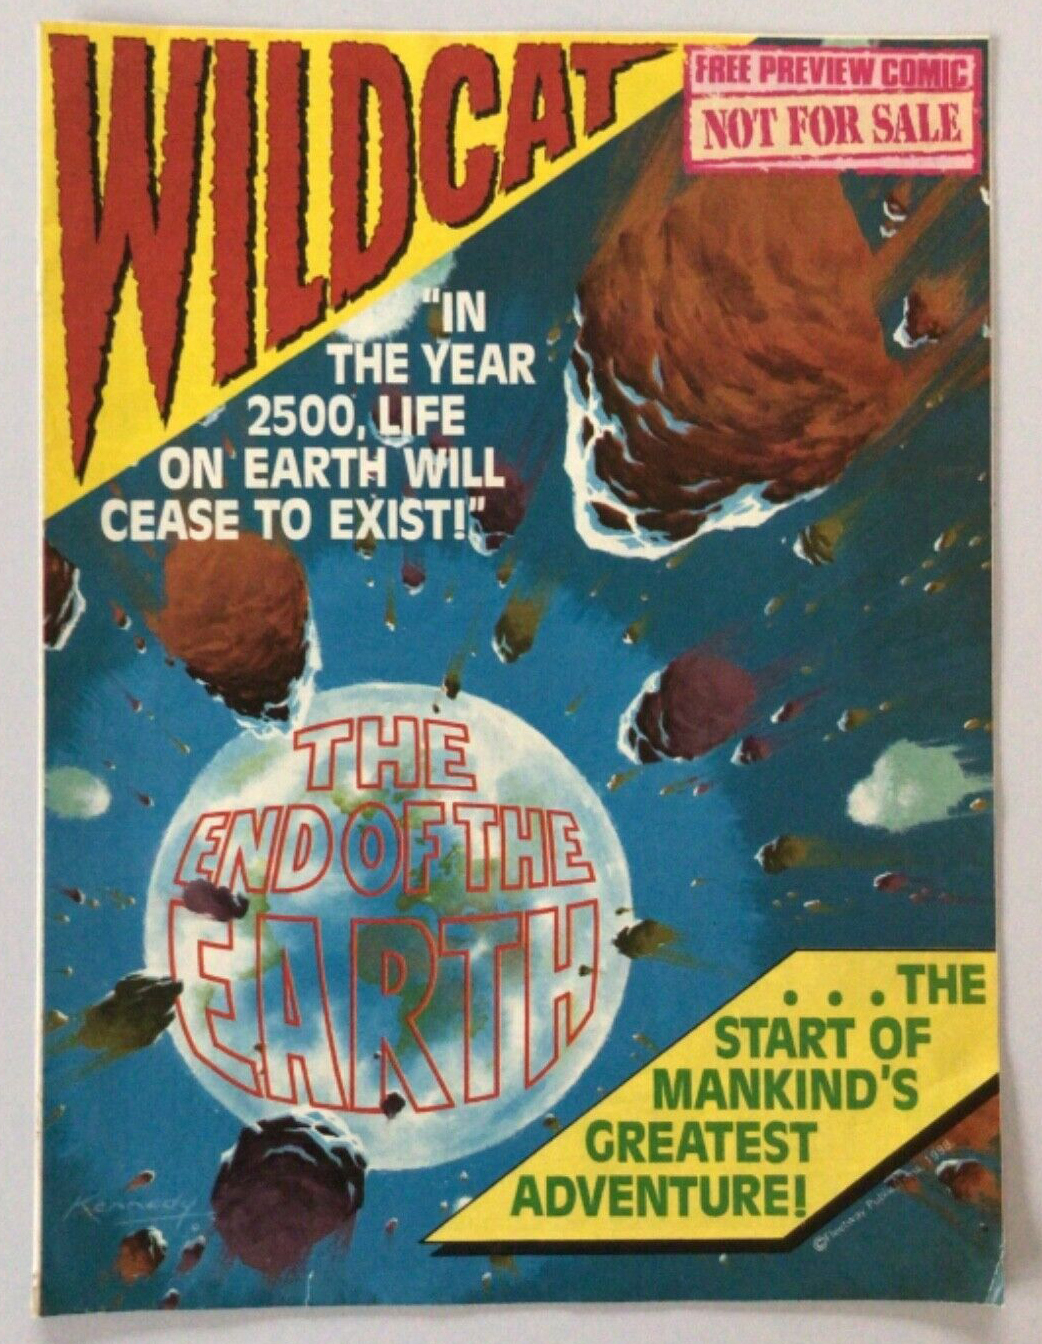 A copy of the  preview for Wildcat, IPC's last non-licensed boys adventure title, published in the late 1980s, given away free in other weeklies